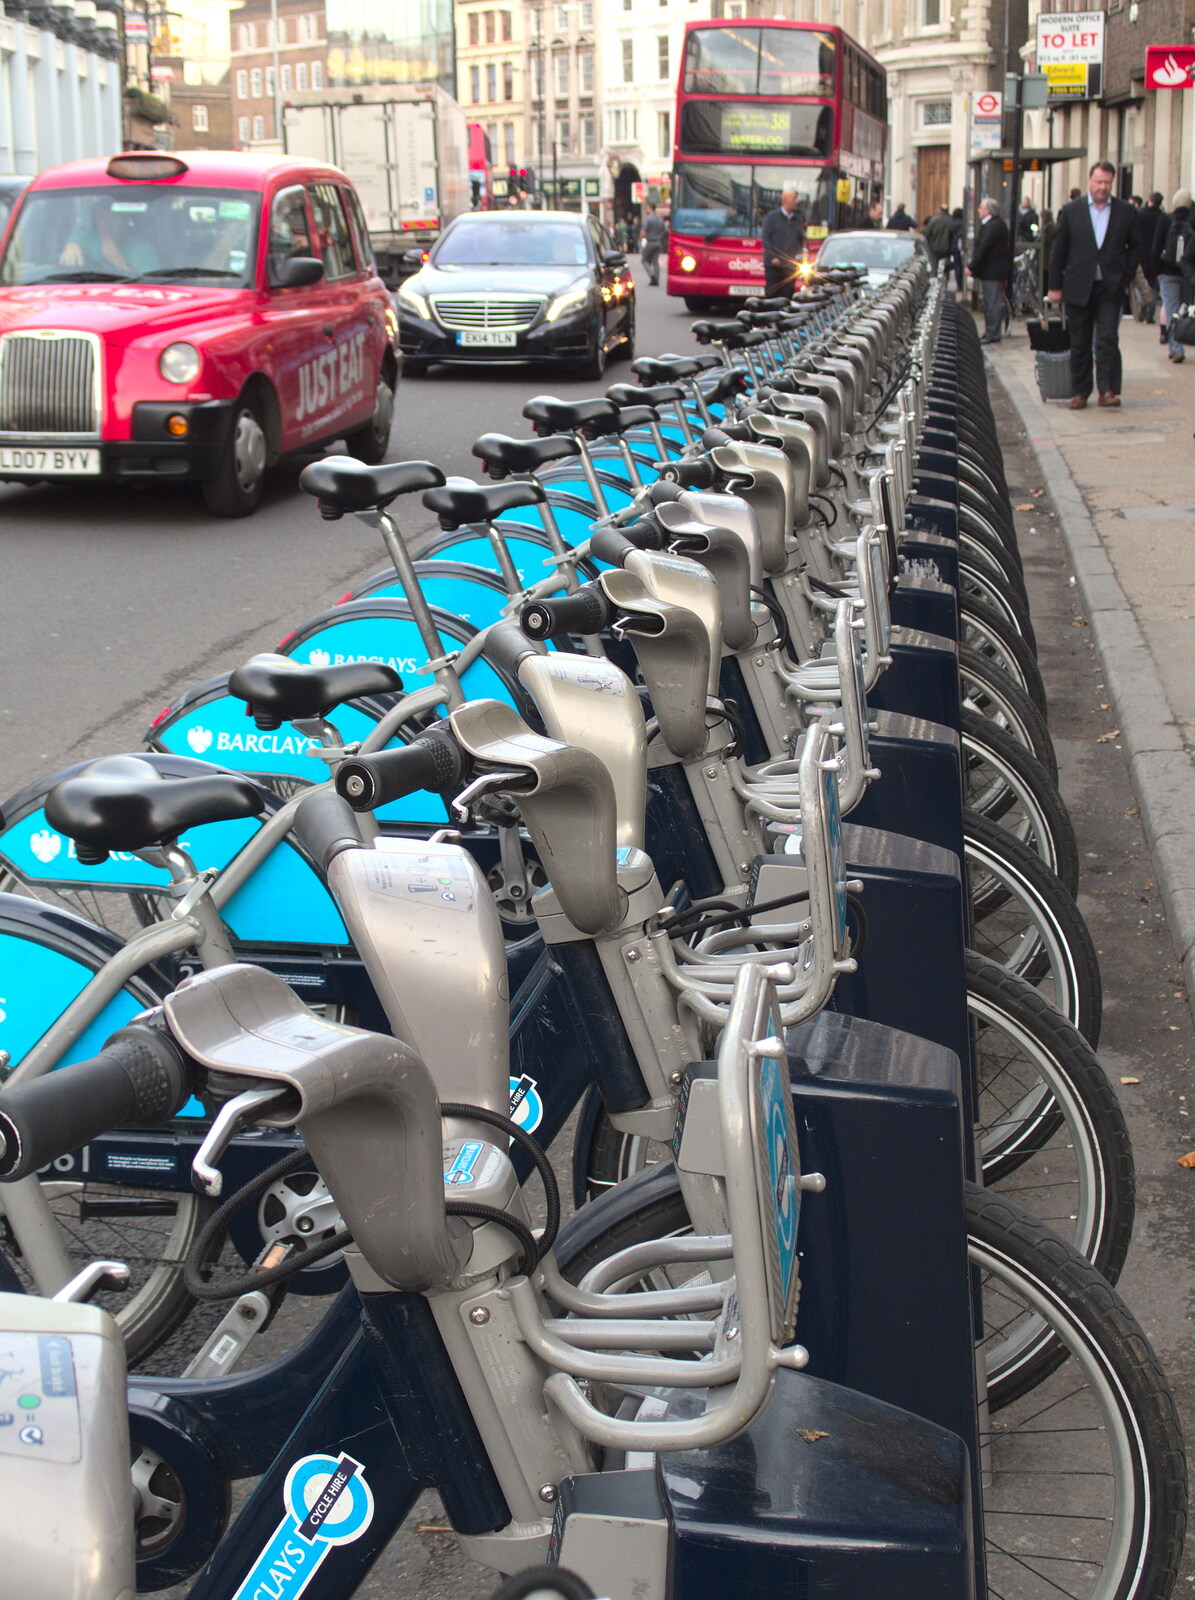 A whole line of Boris bikes from A Melting House Made of Wax, Southwark, London - 12th November 2014